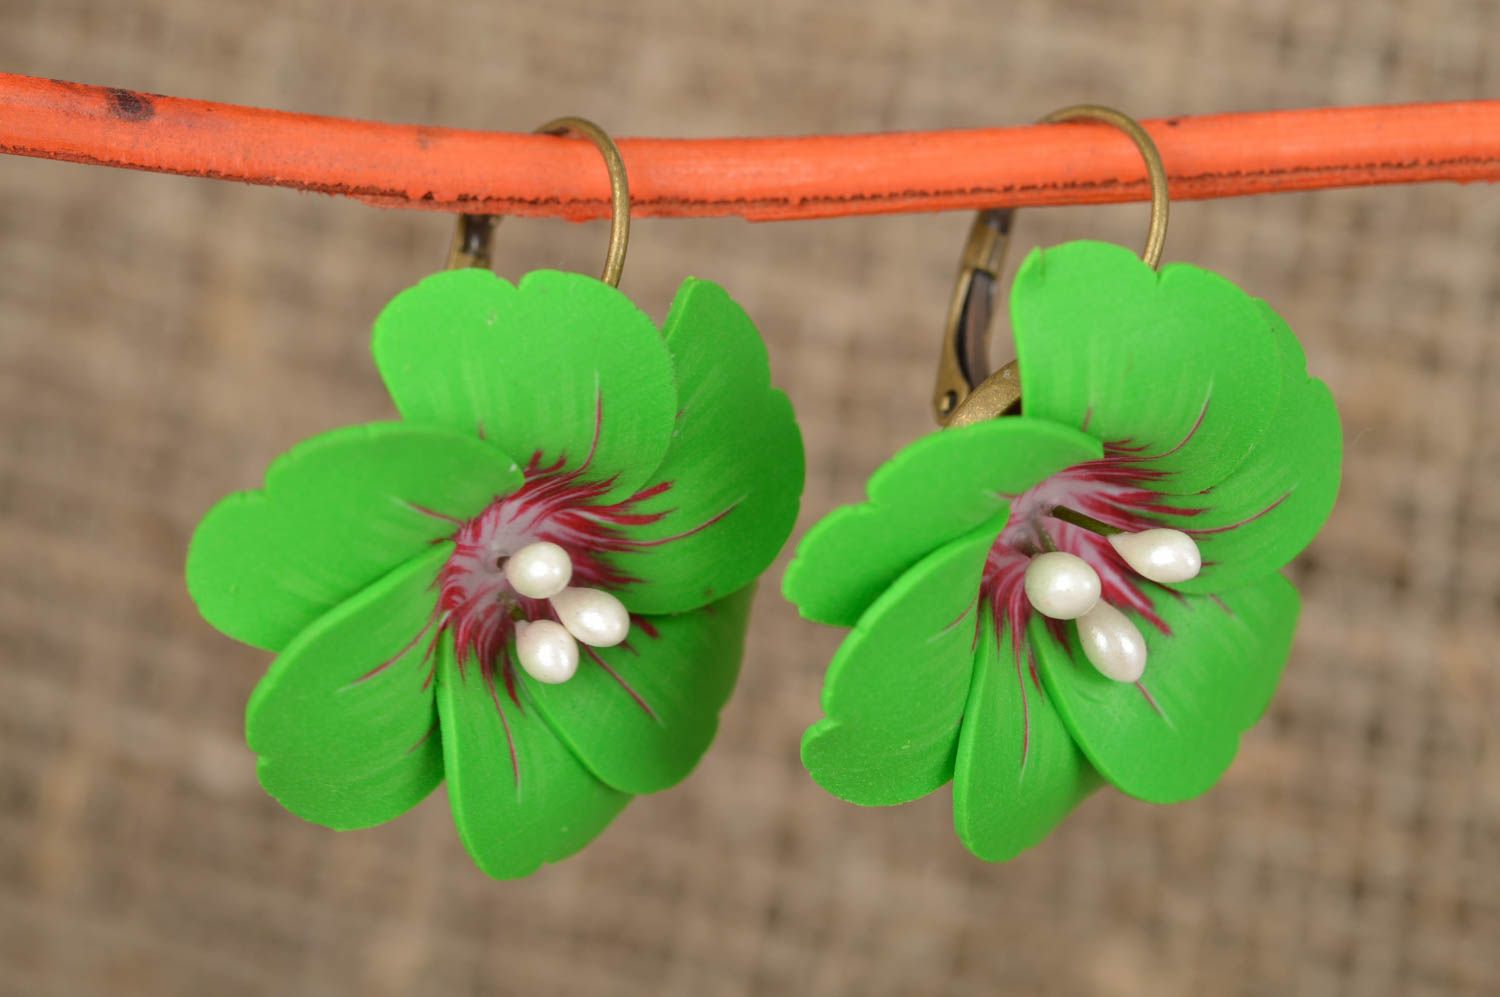 Exclusive green flower earrings made of polymer clay for summer look photo 1